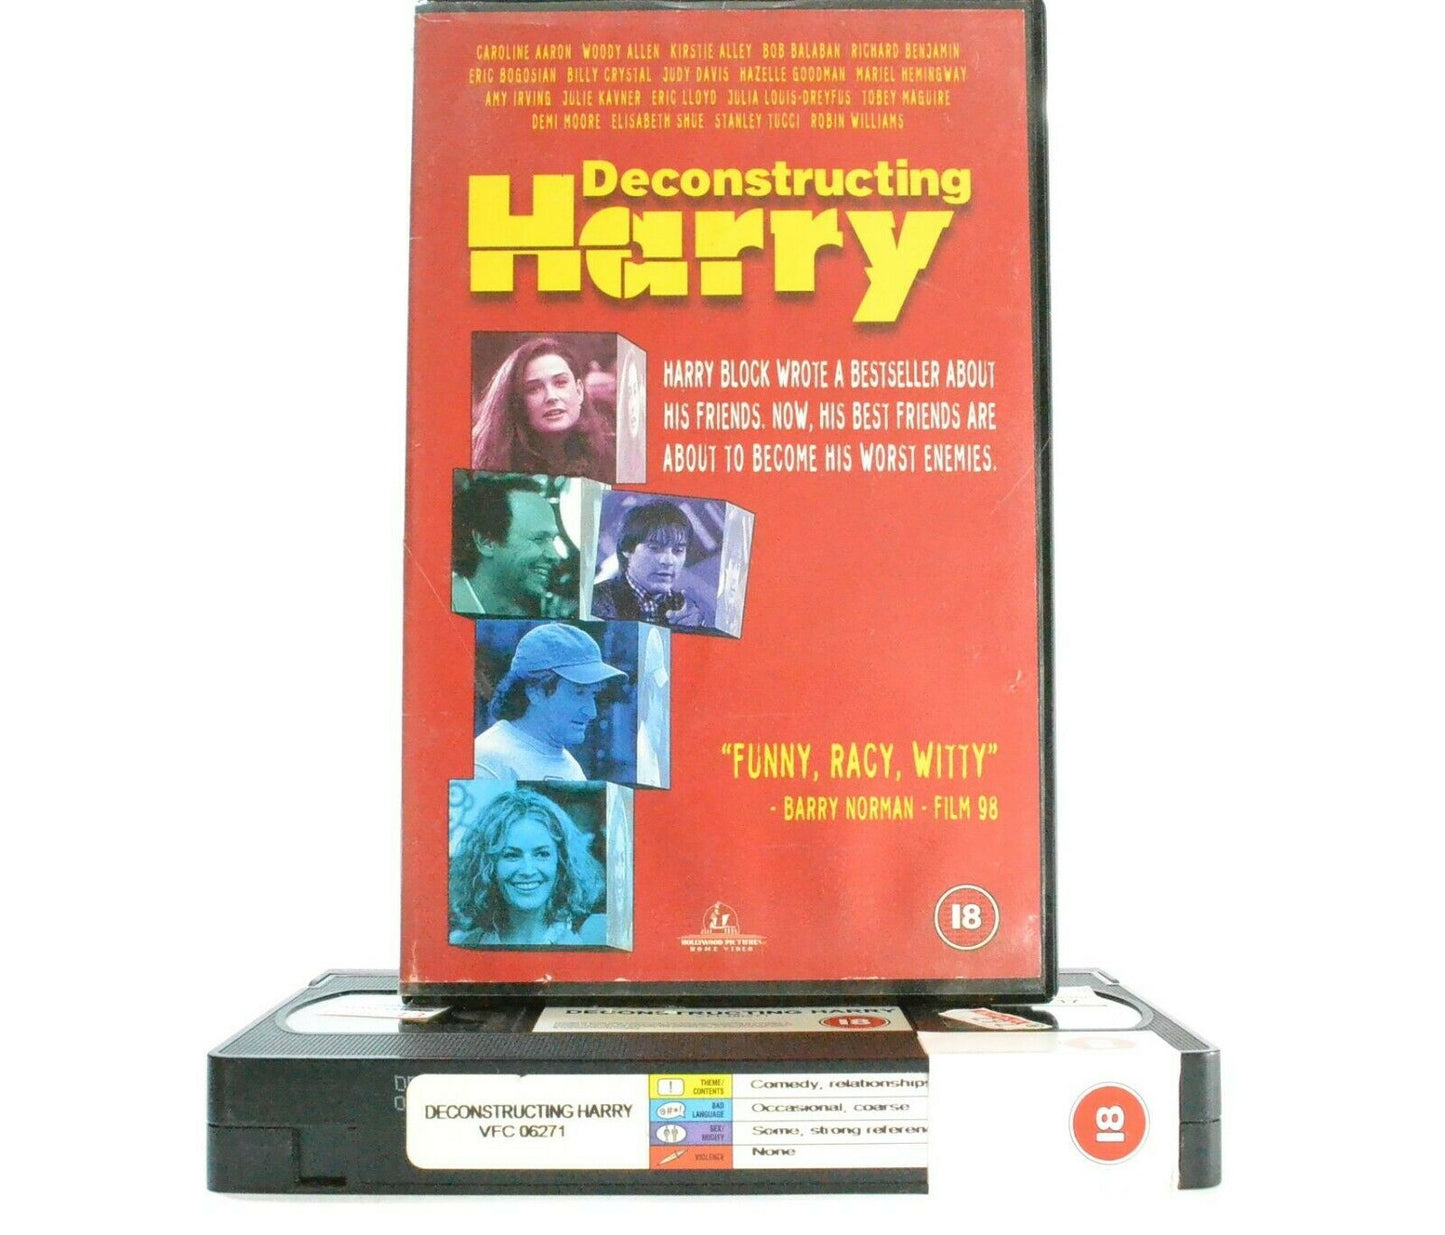 Deconstructing Harry: Woody Allen Film - Comedy - Large Box - Demi Moore - VHS-